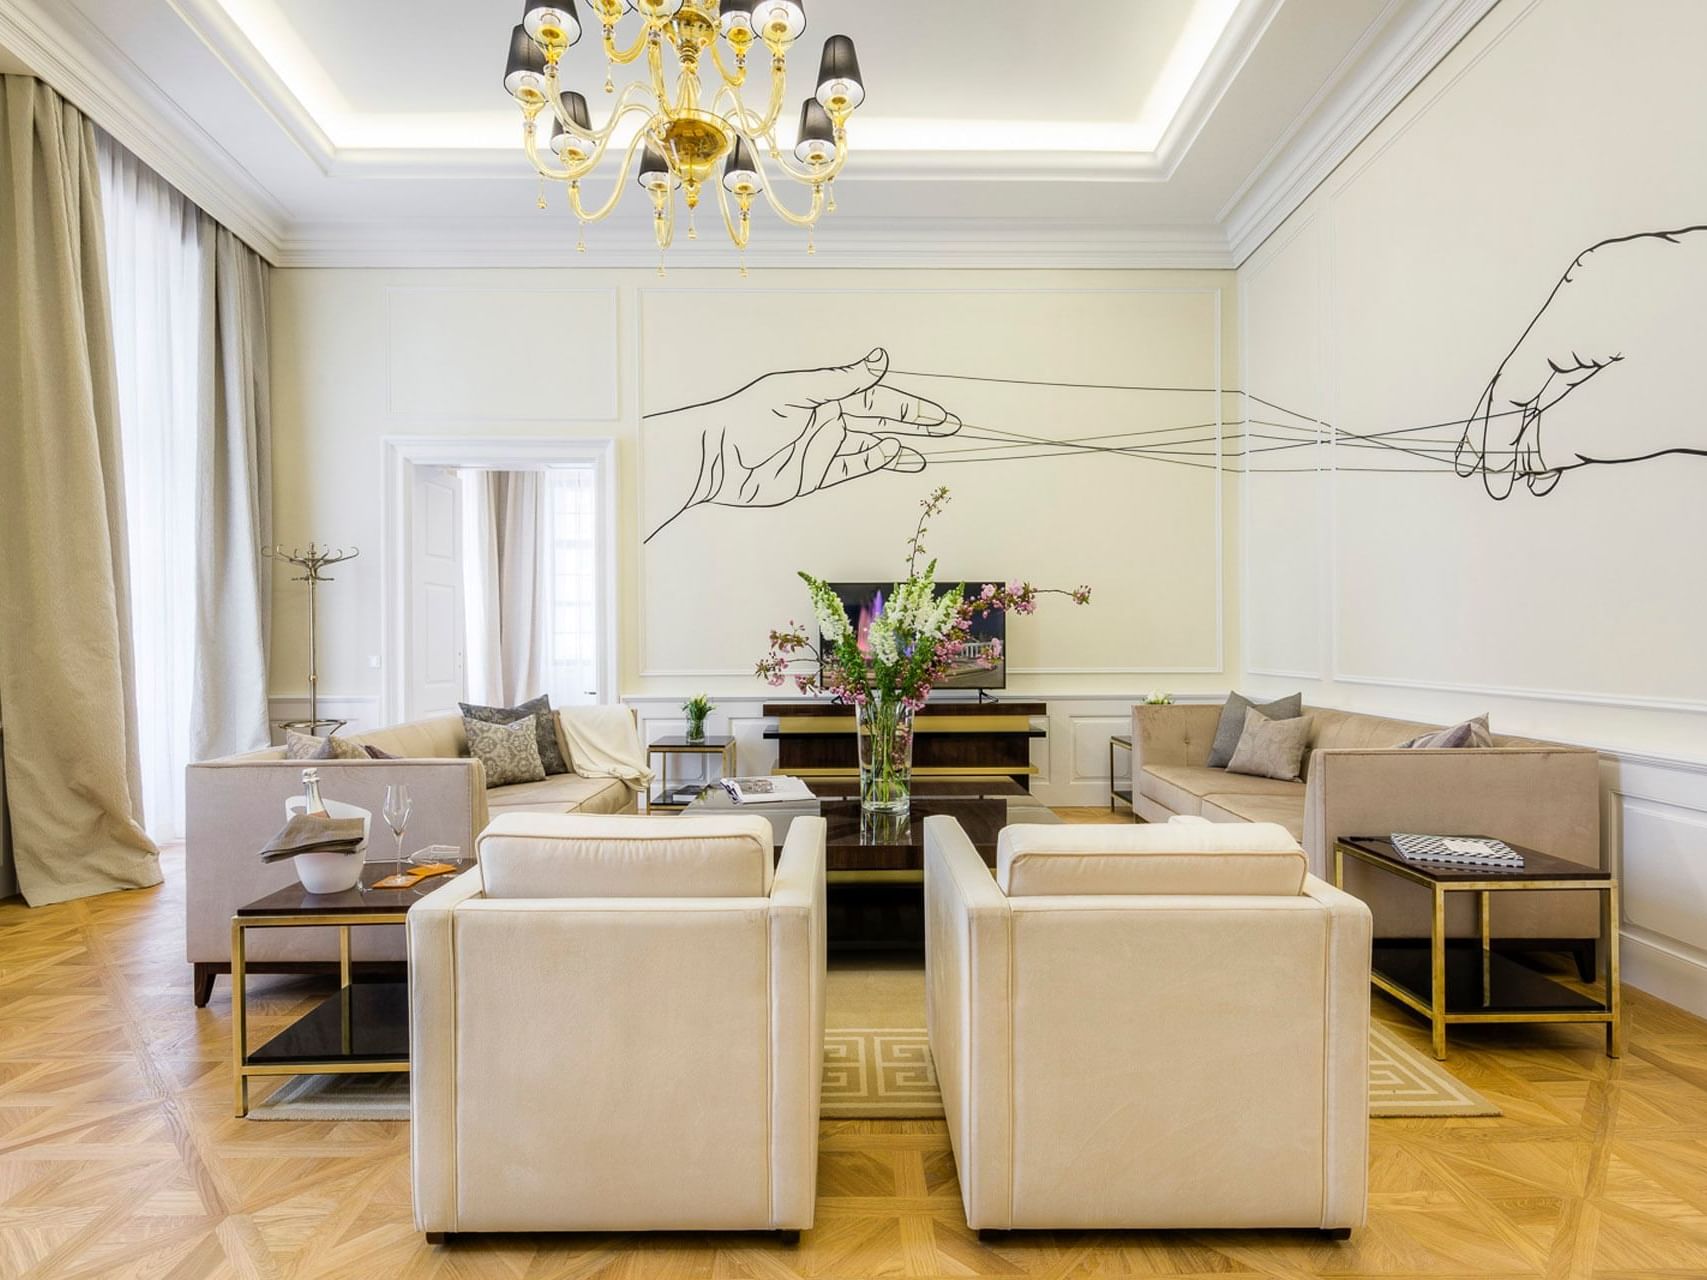 Classic Suite at Residence Wollzeile in Vienna, Austria